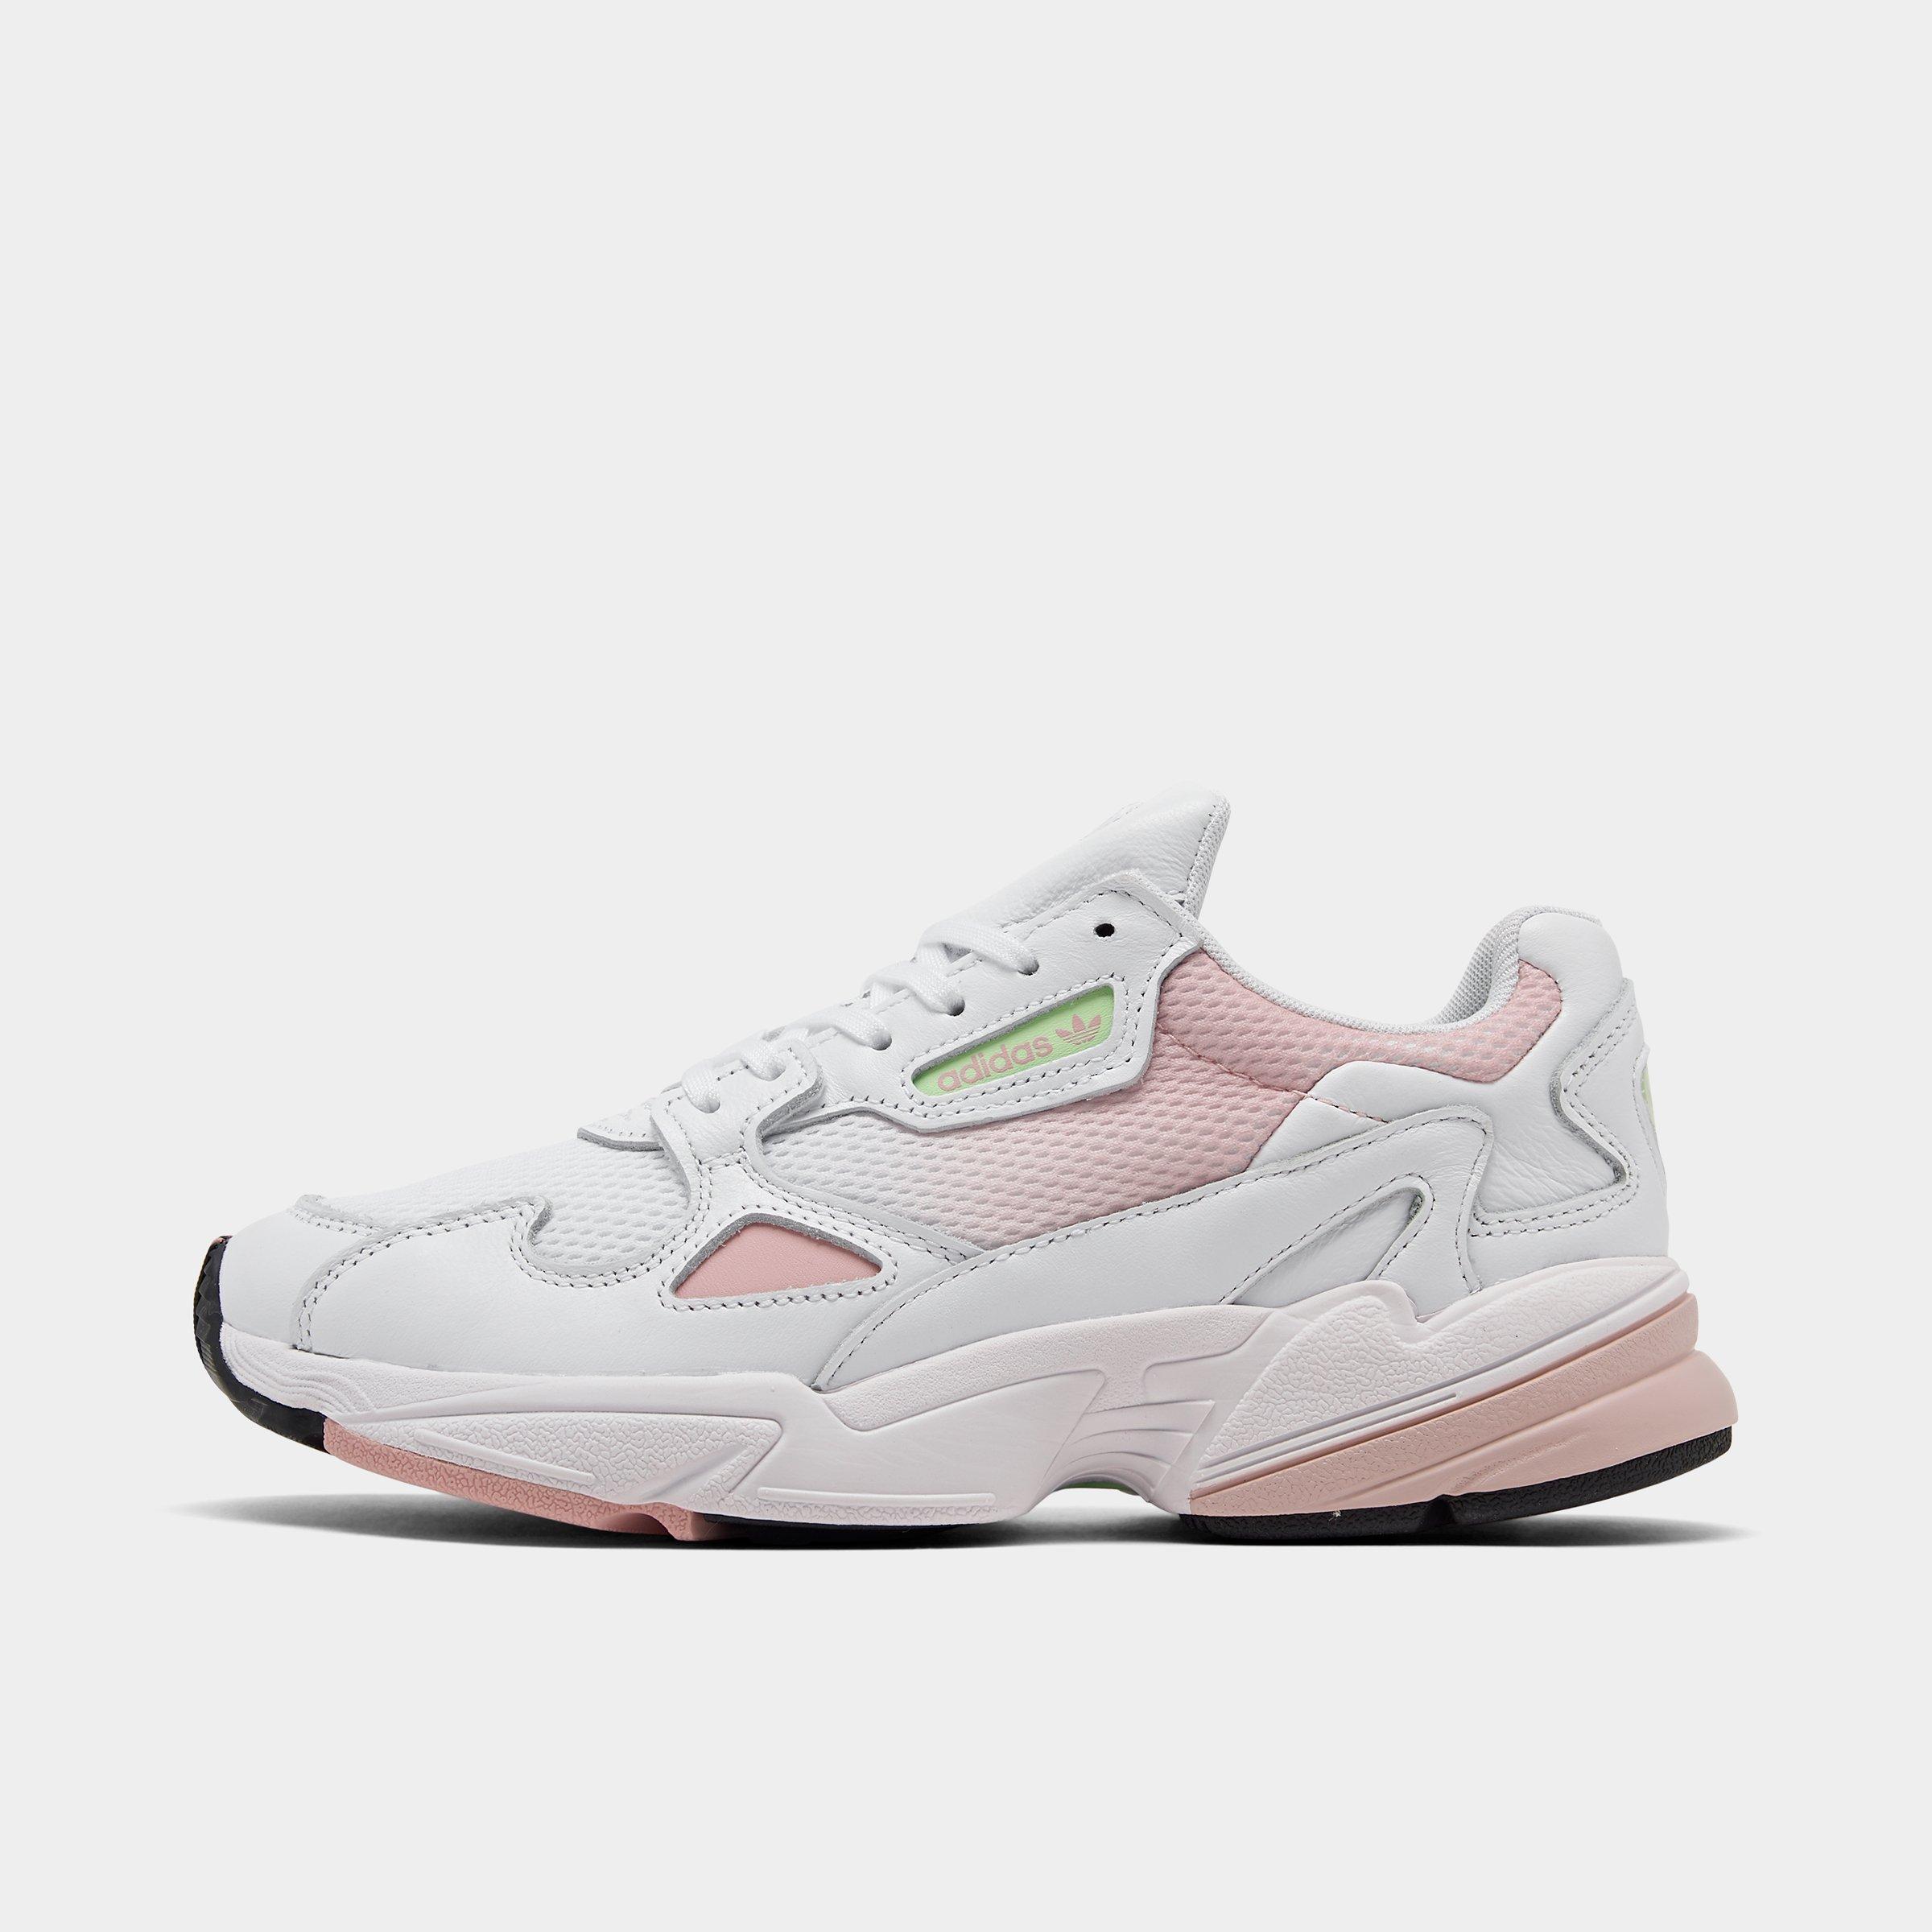 pink adidas falcon shoes